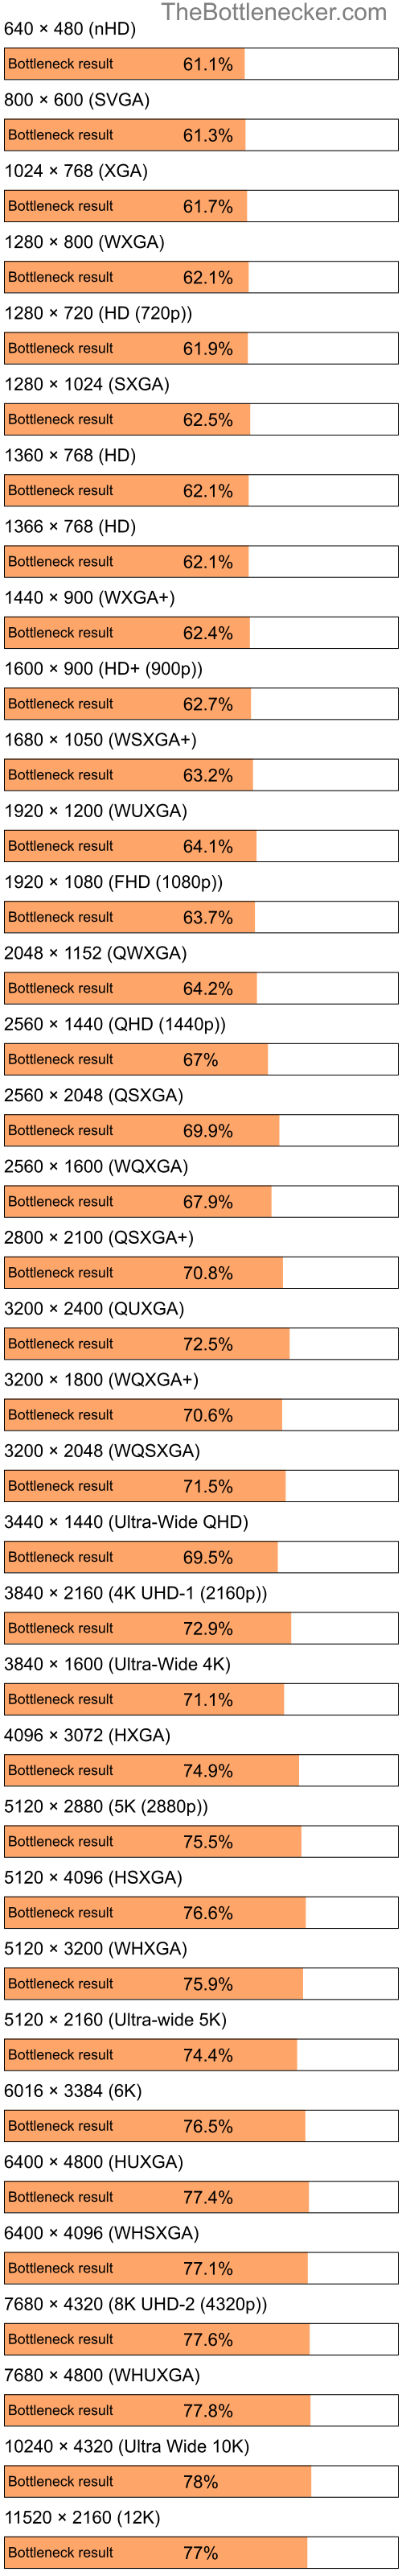 Bottleneck results by resolution for Intel Celeron M and NVIDIA Quadro FX 4400 in General Tasks